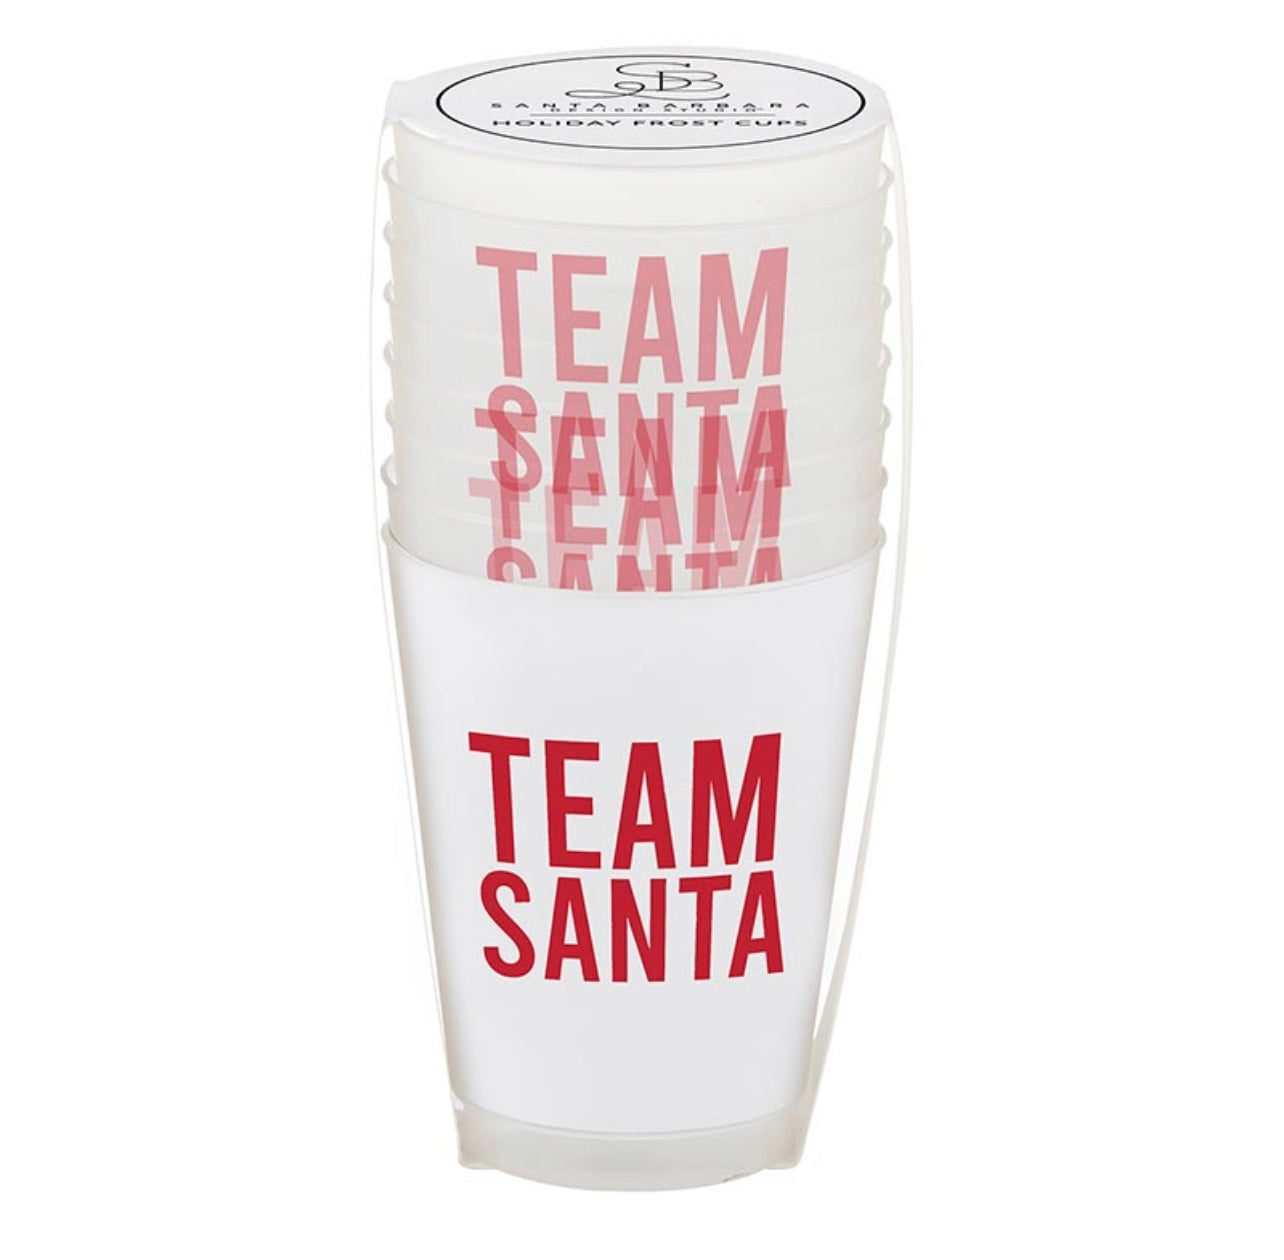 white frosted plastic christmas cup with red script that reads "team santa" comes in a set of 8